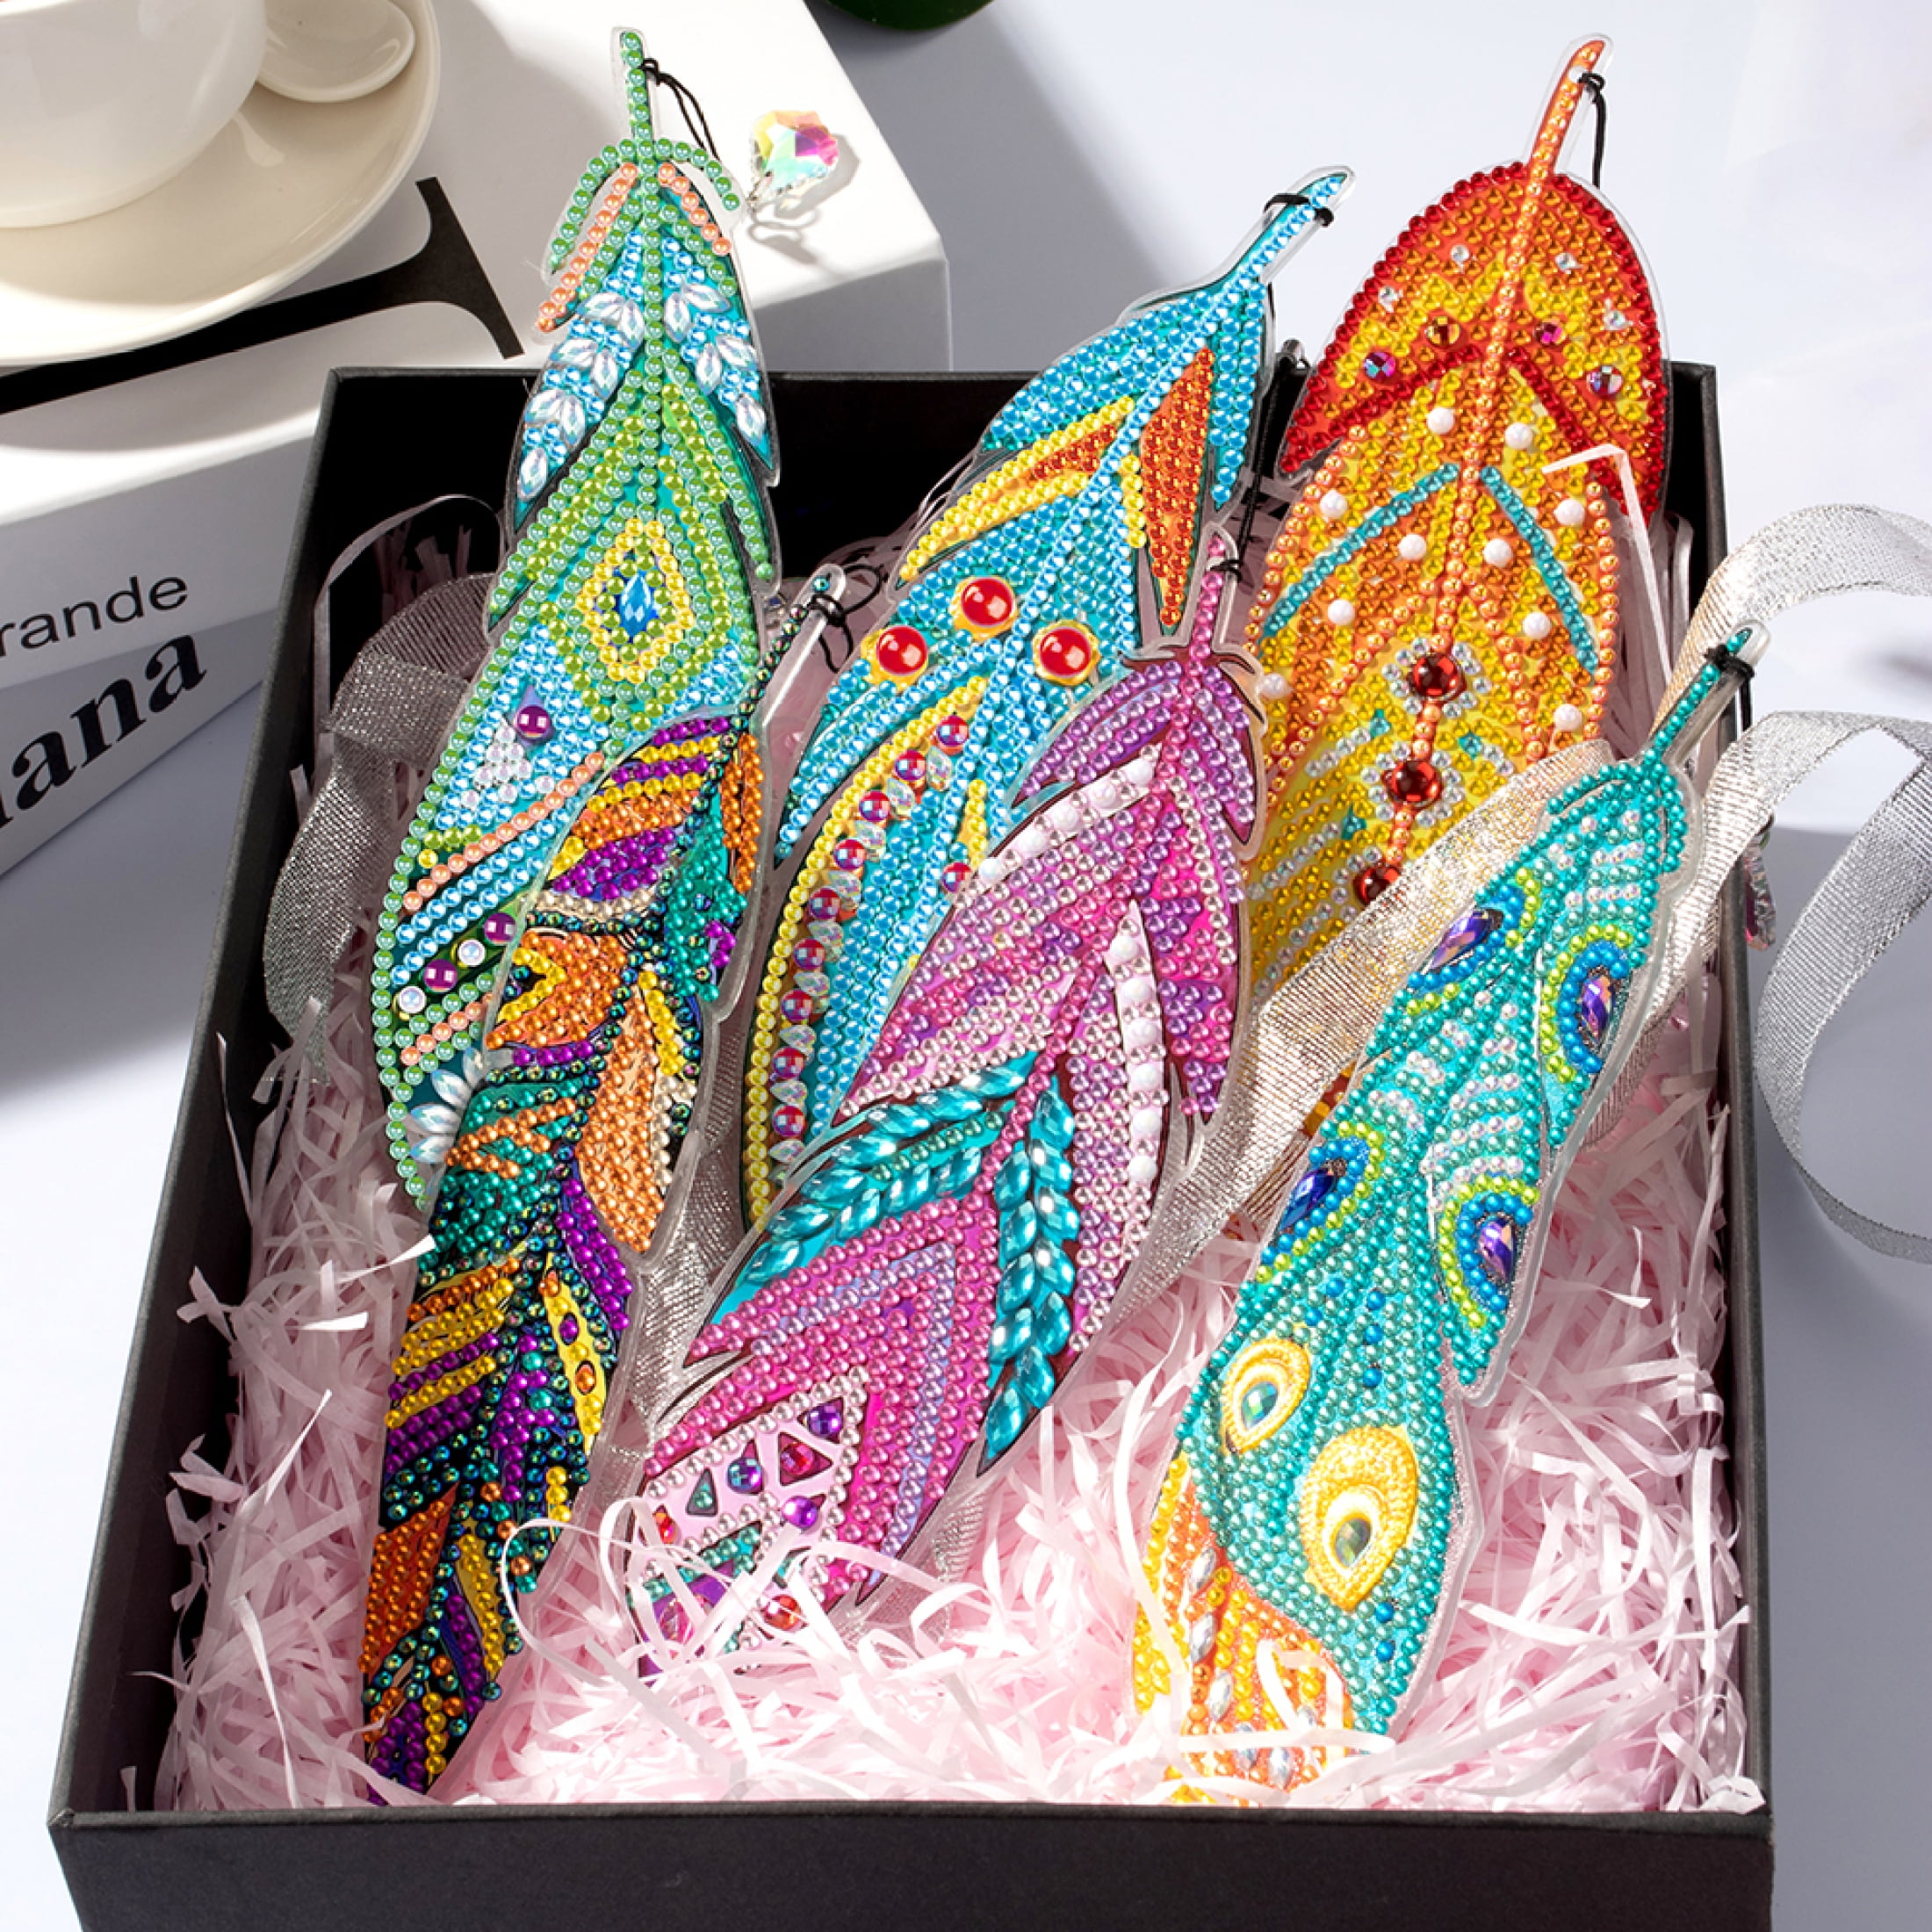 Yesfashion Store IN stock 6pcs Diamond Painting Bookmark Kits Feather Shape  Thickened Embroidery Mosaic Book Mark Art Craft For Beginner